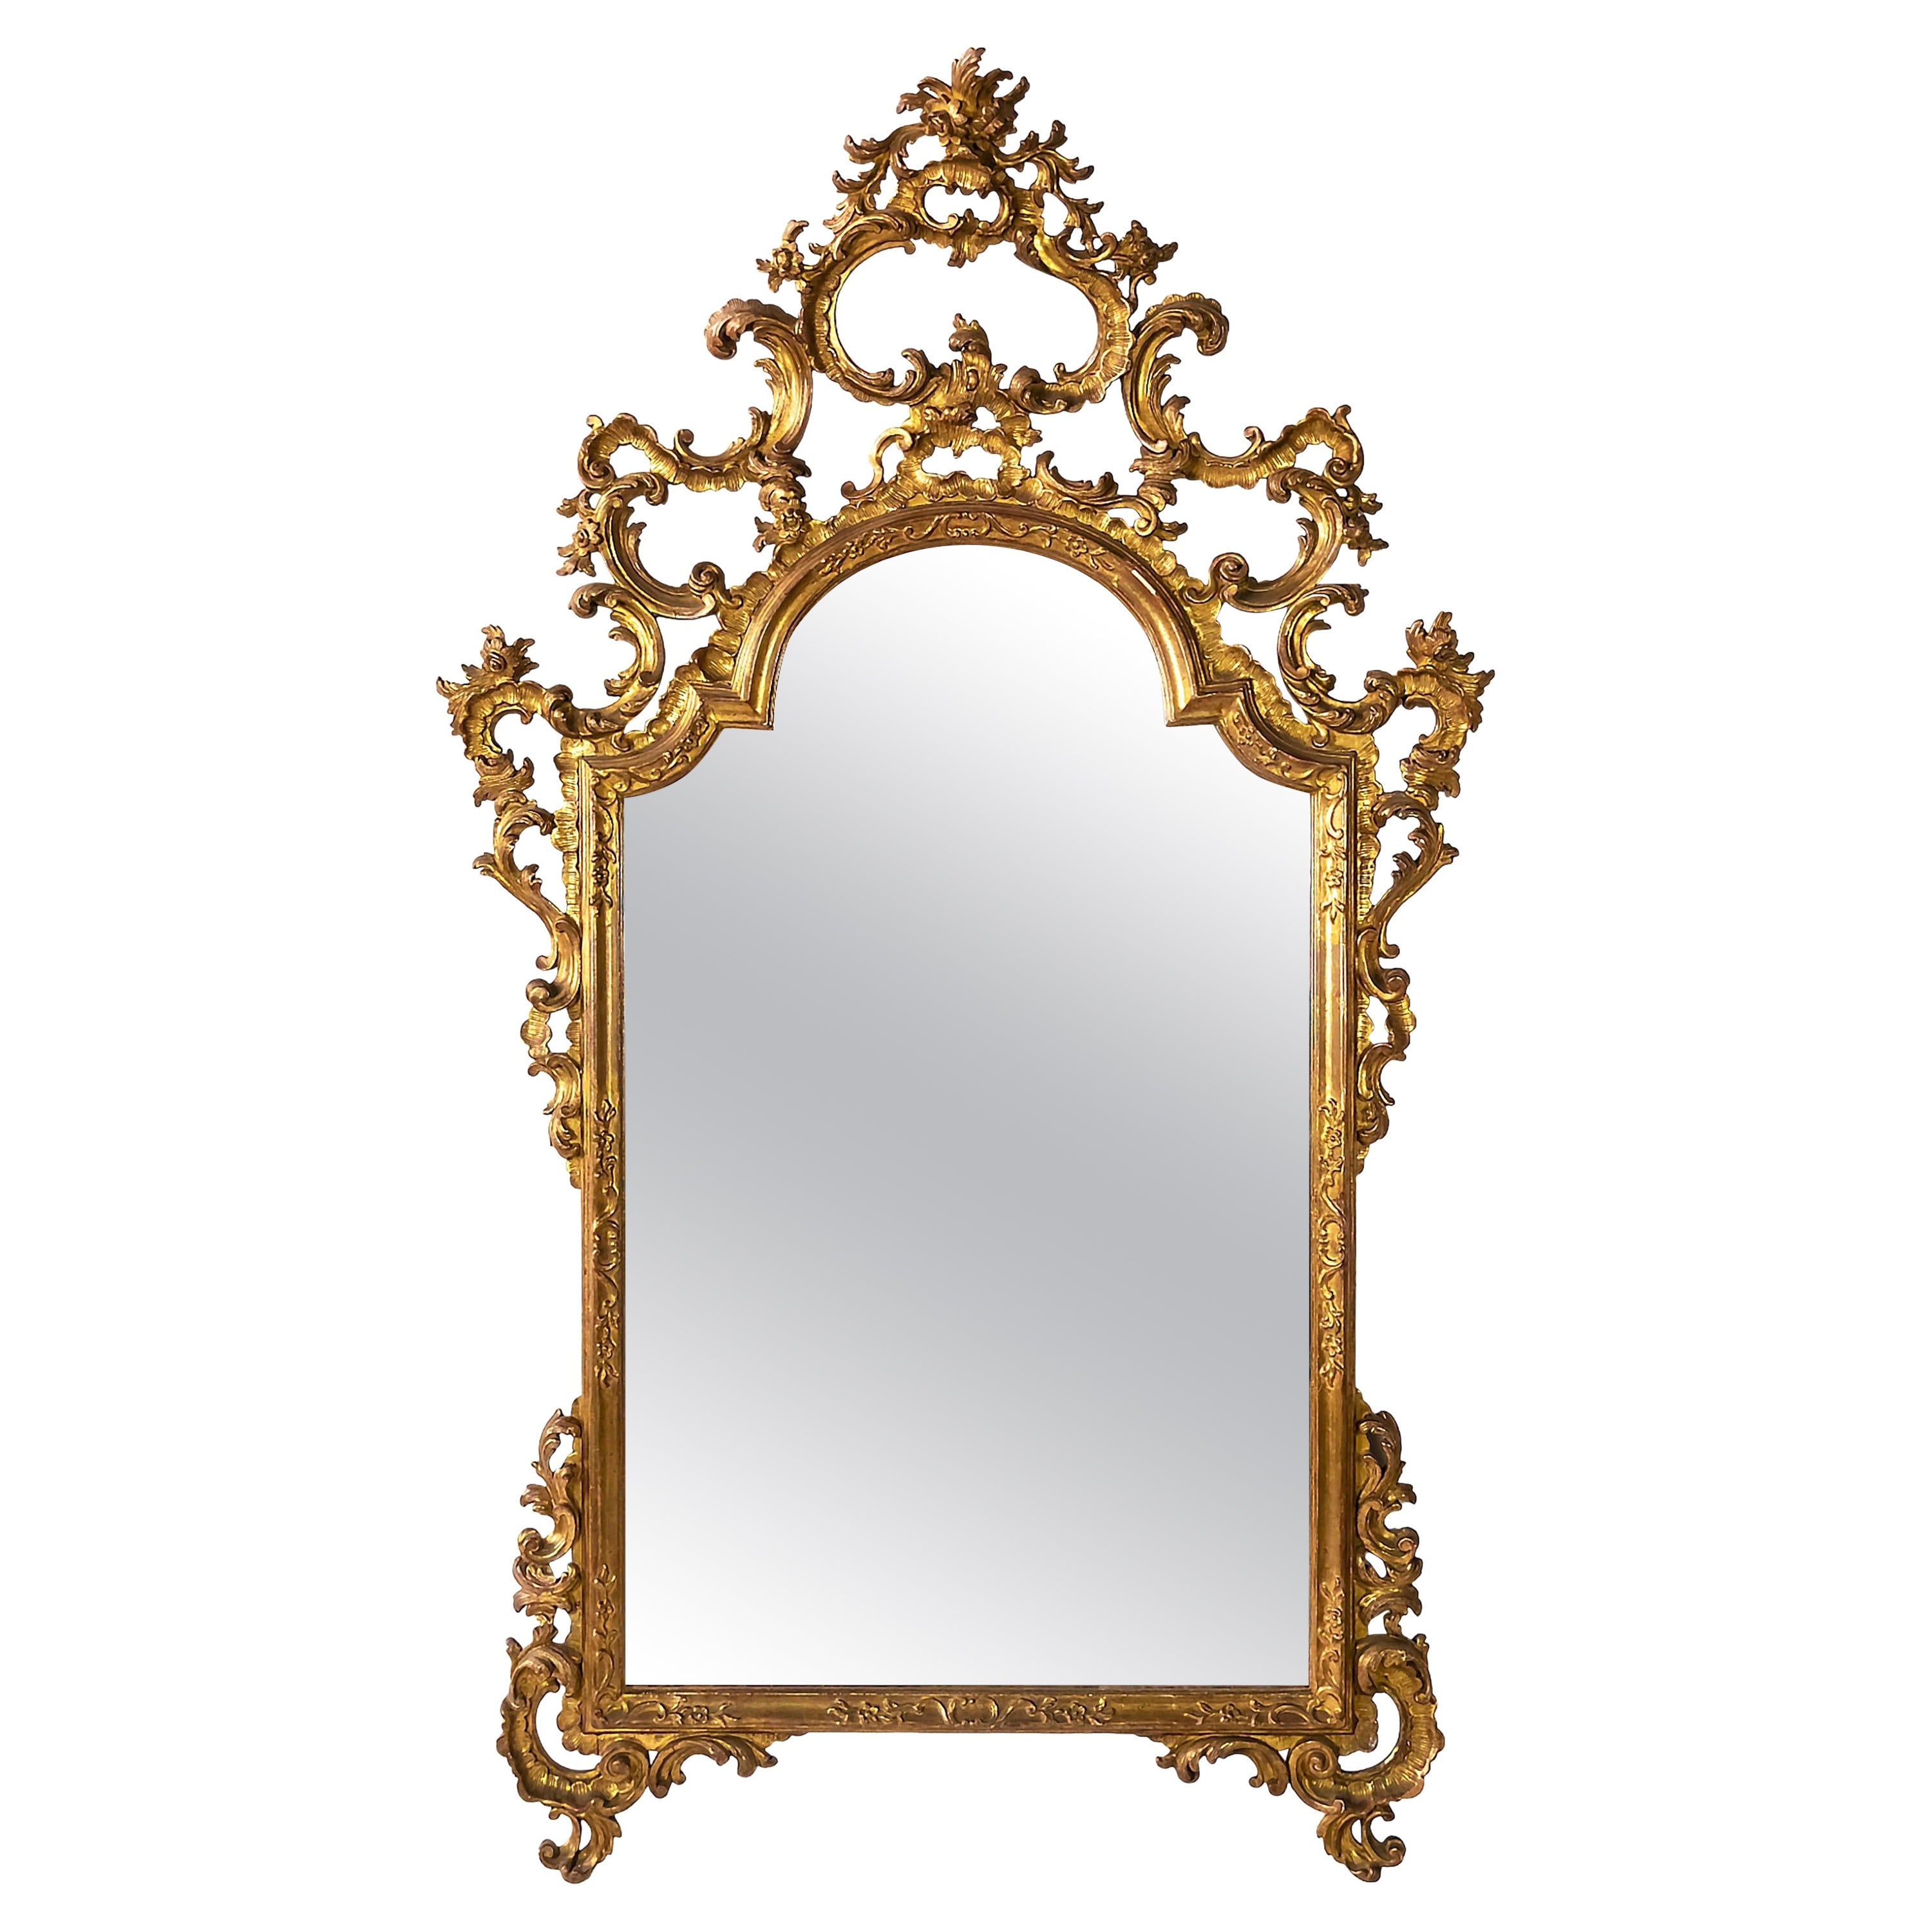 Antique Italian Hand-Carved Gilt Wood Wall Mirror